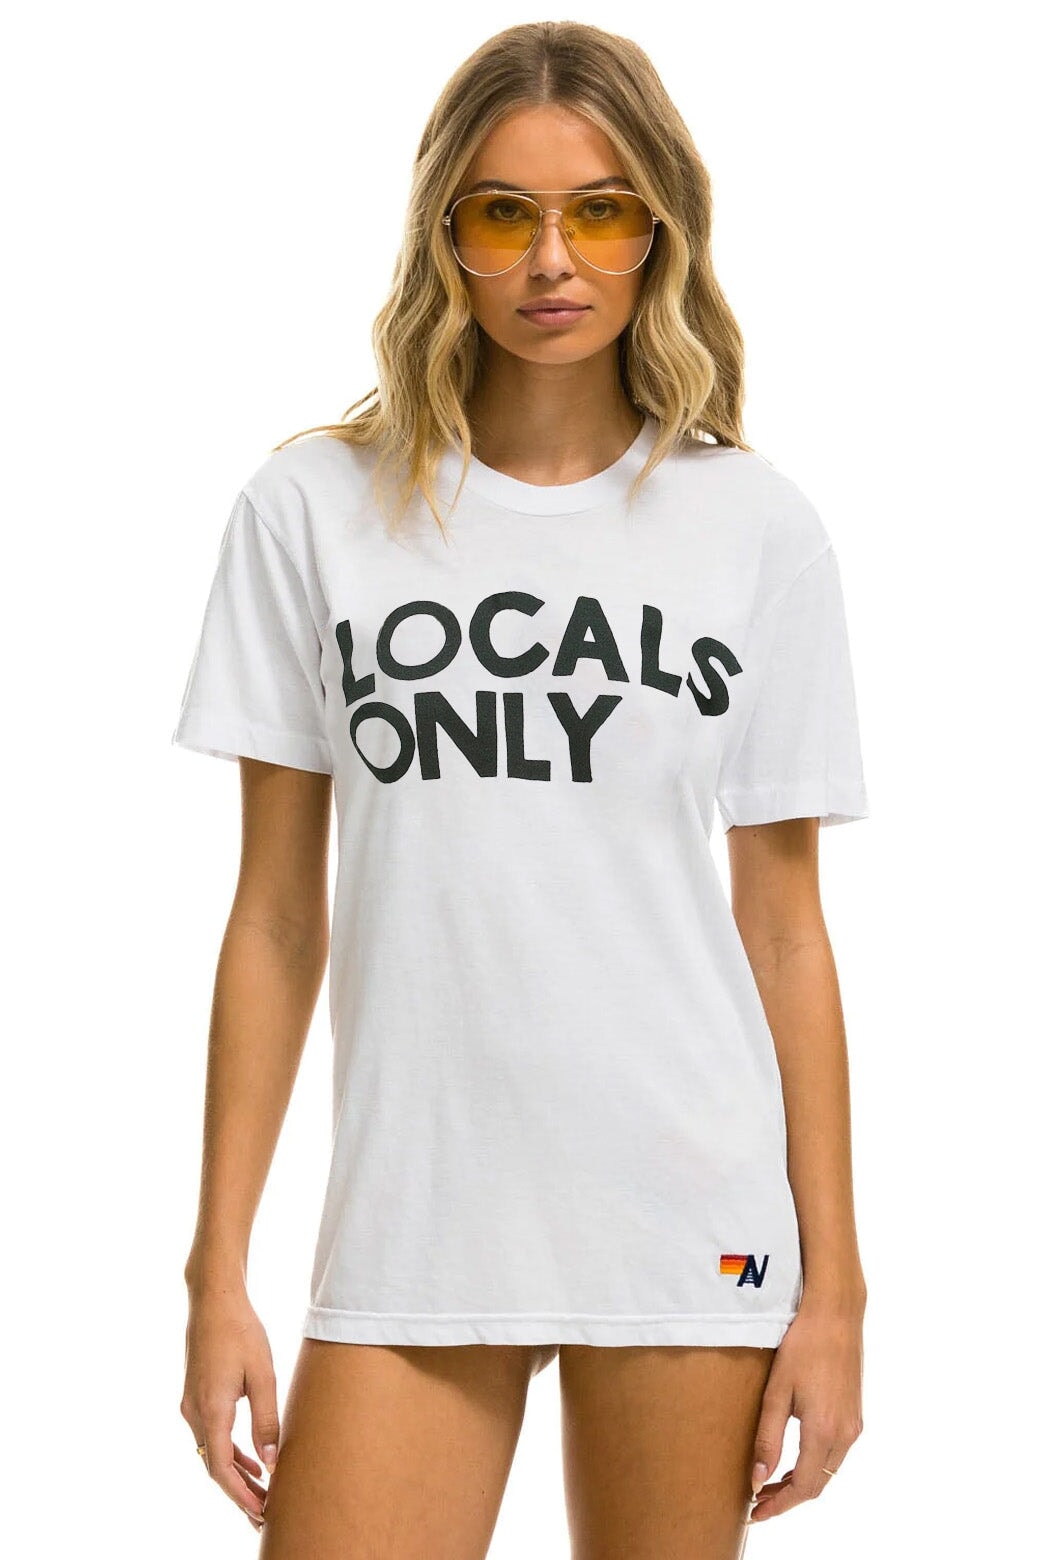 LOCALS ONLY TEE - WHITE Tees Aviator Nation 